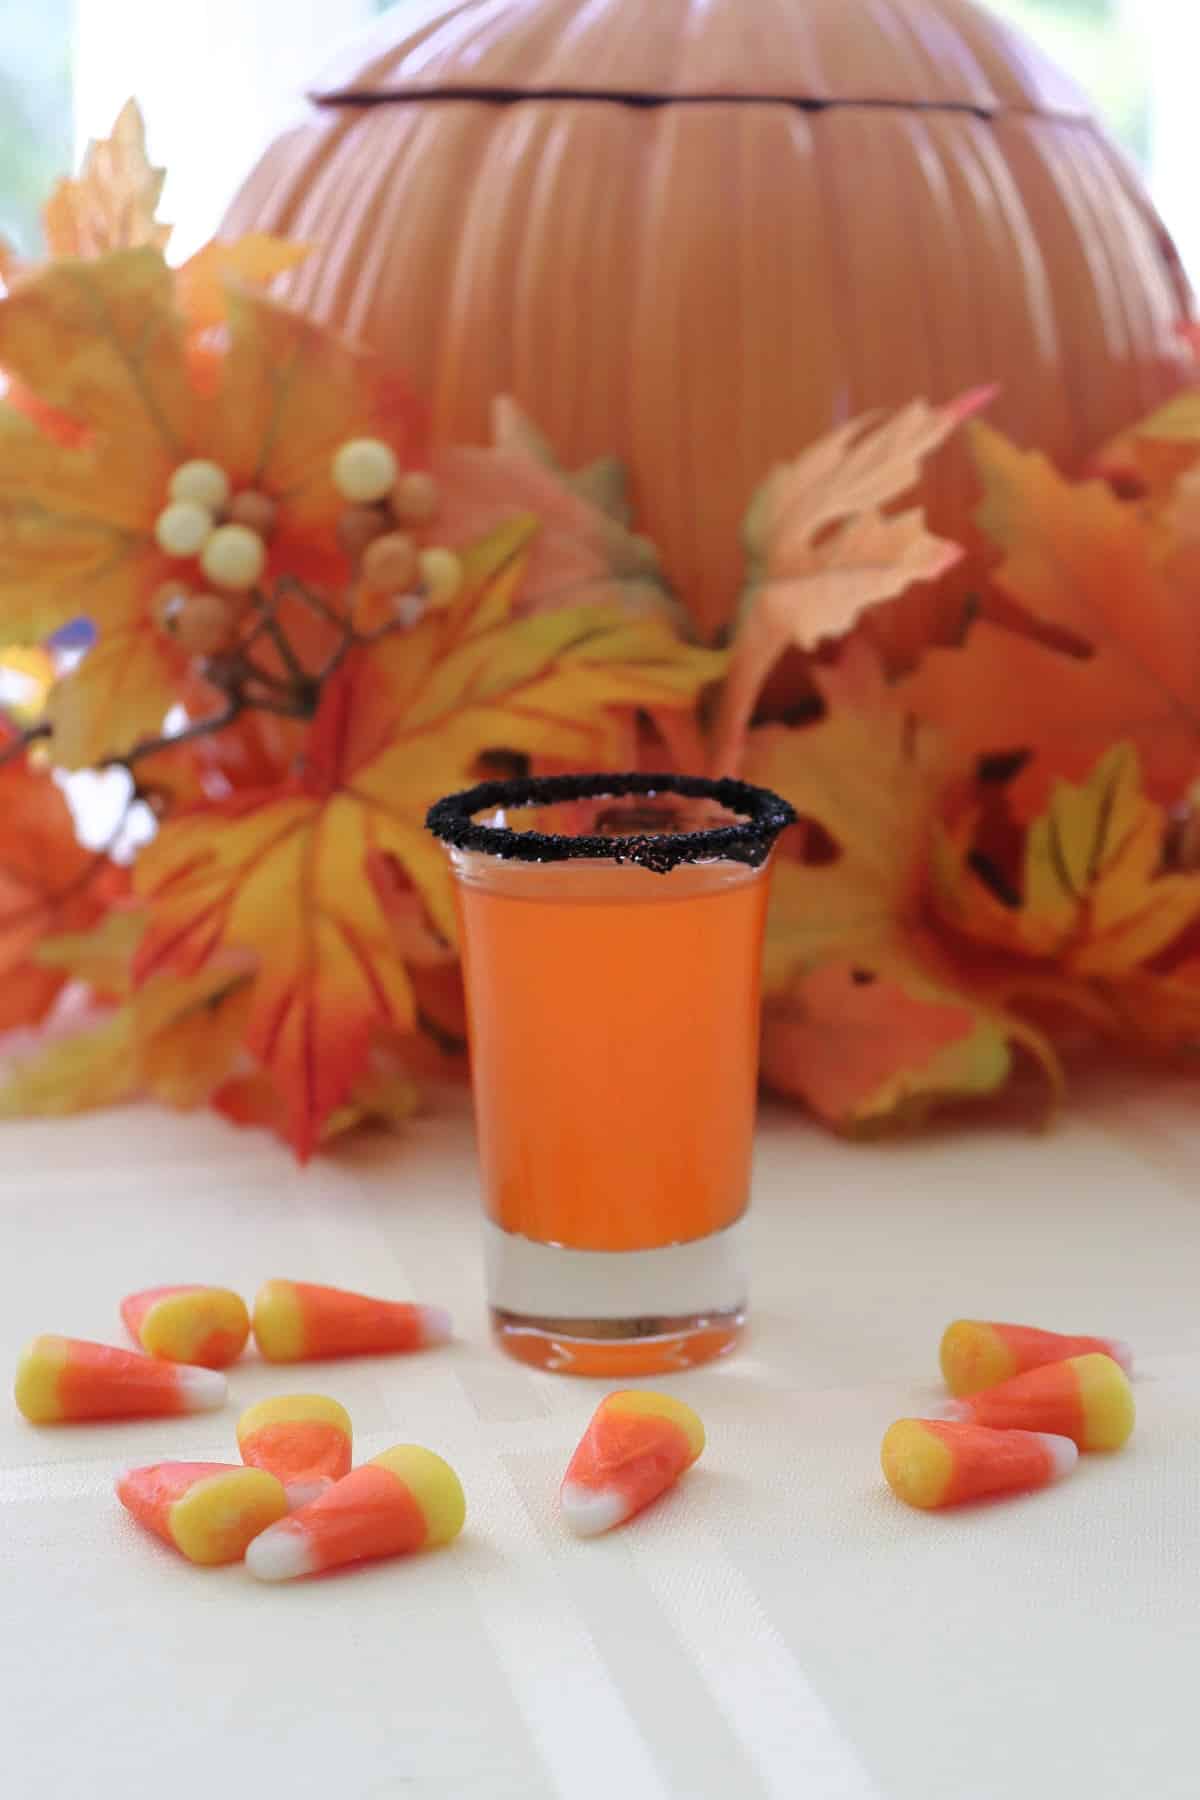 A shot glass rimmed with black sugar filled with orange candy corn vodka.